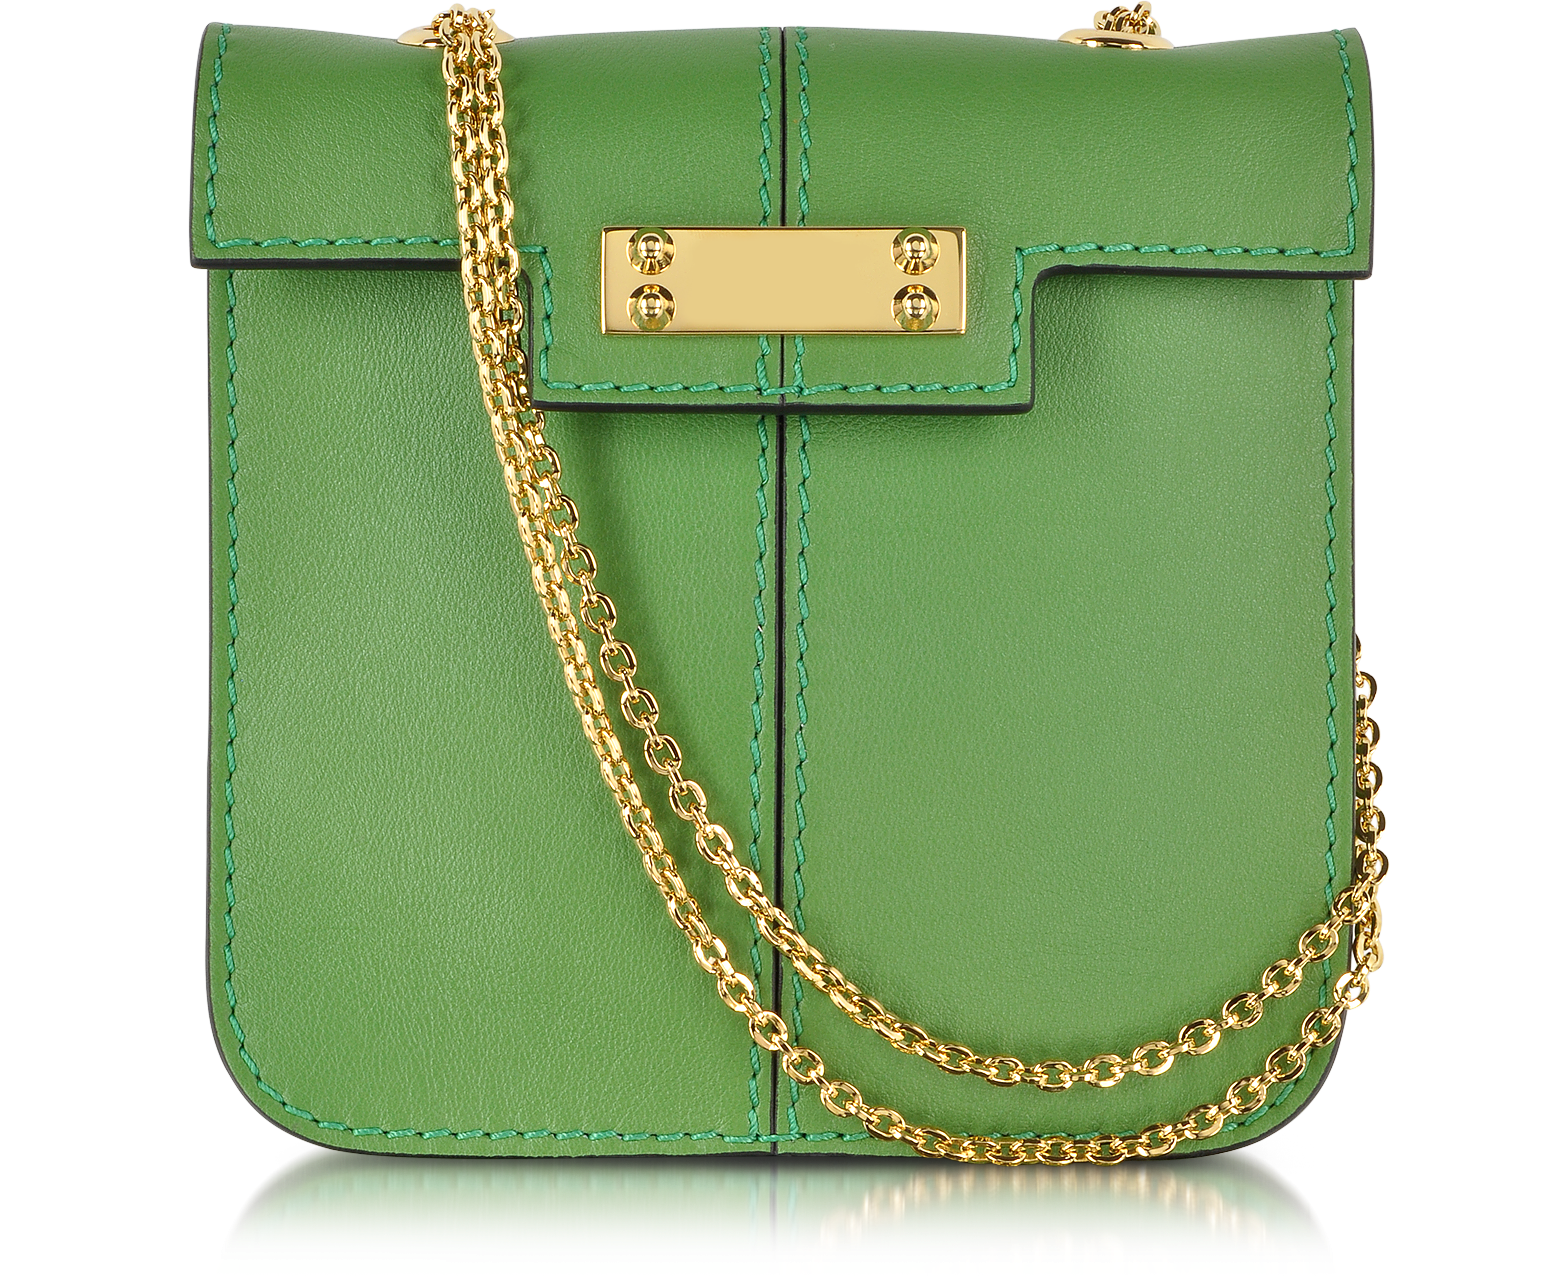 Valentino Clover Mini Shoulder Bag with Chain Strap at FORZIERI